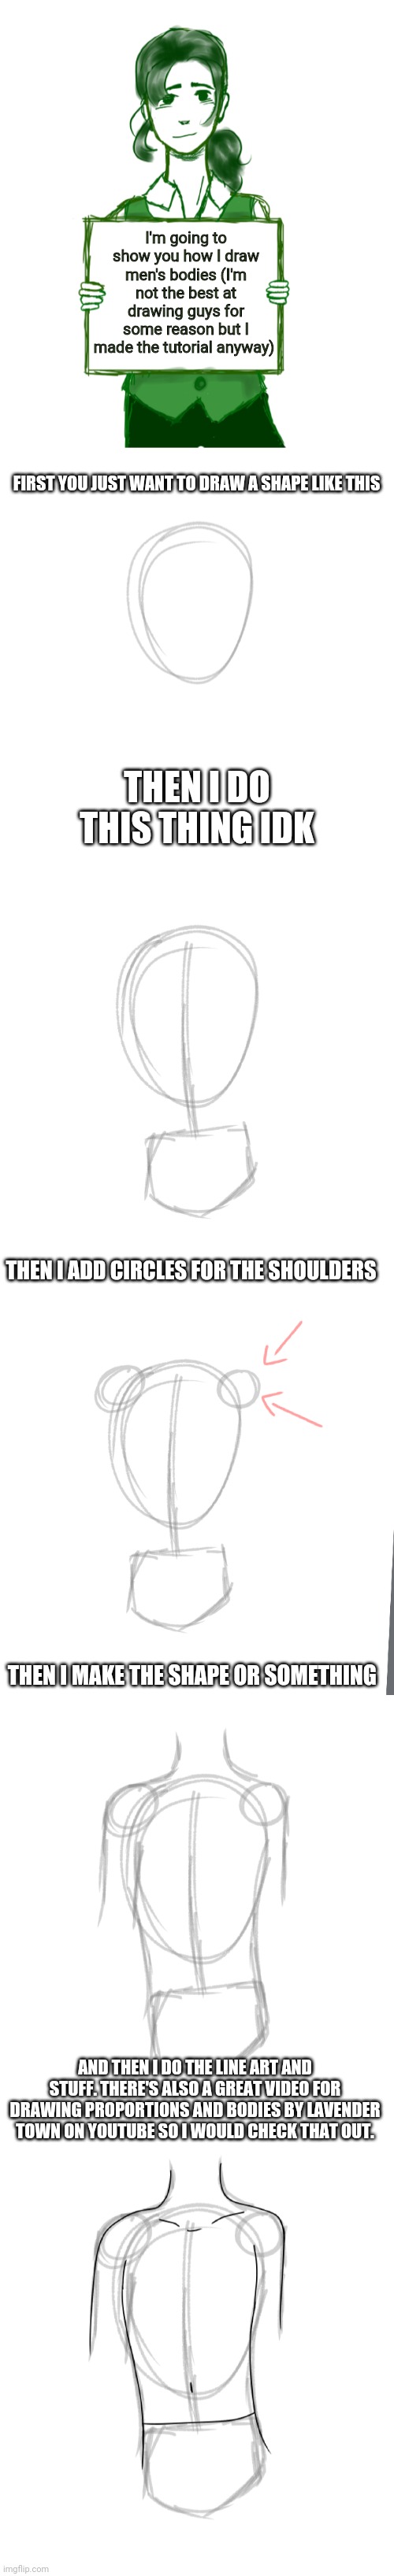 Male bodies digital art tutorial | I'm going to show you how I draw men's bodies (I'm not the best at drawing guys for some reason but I made the tutorial anyway); FIRST YOU JUST WANT TO DRAW A SHAPE LIKE THIS; THEN I DO THIS THING IDK; THEN I ADD CIRCLES FOR THE SHOULDERS; THEN I MAKE THE SHAPE OR SOMETHING; AND THEN I DO THE LINE ART AND STUFF. THERE'S ALSO A GREAT VIDEO FOR DRAWING PROPORTIONS AND BODIES BY LAVENDER TOWN ON YOUTUBE SO I WOULD CHECK THAT OUT. | image tagged in tutorial,drawing,digital art | made w/ Imgflip meme maker